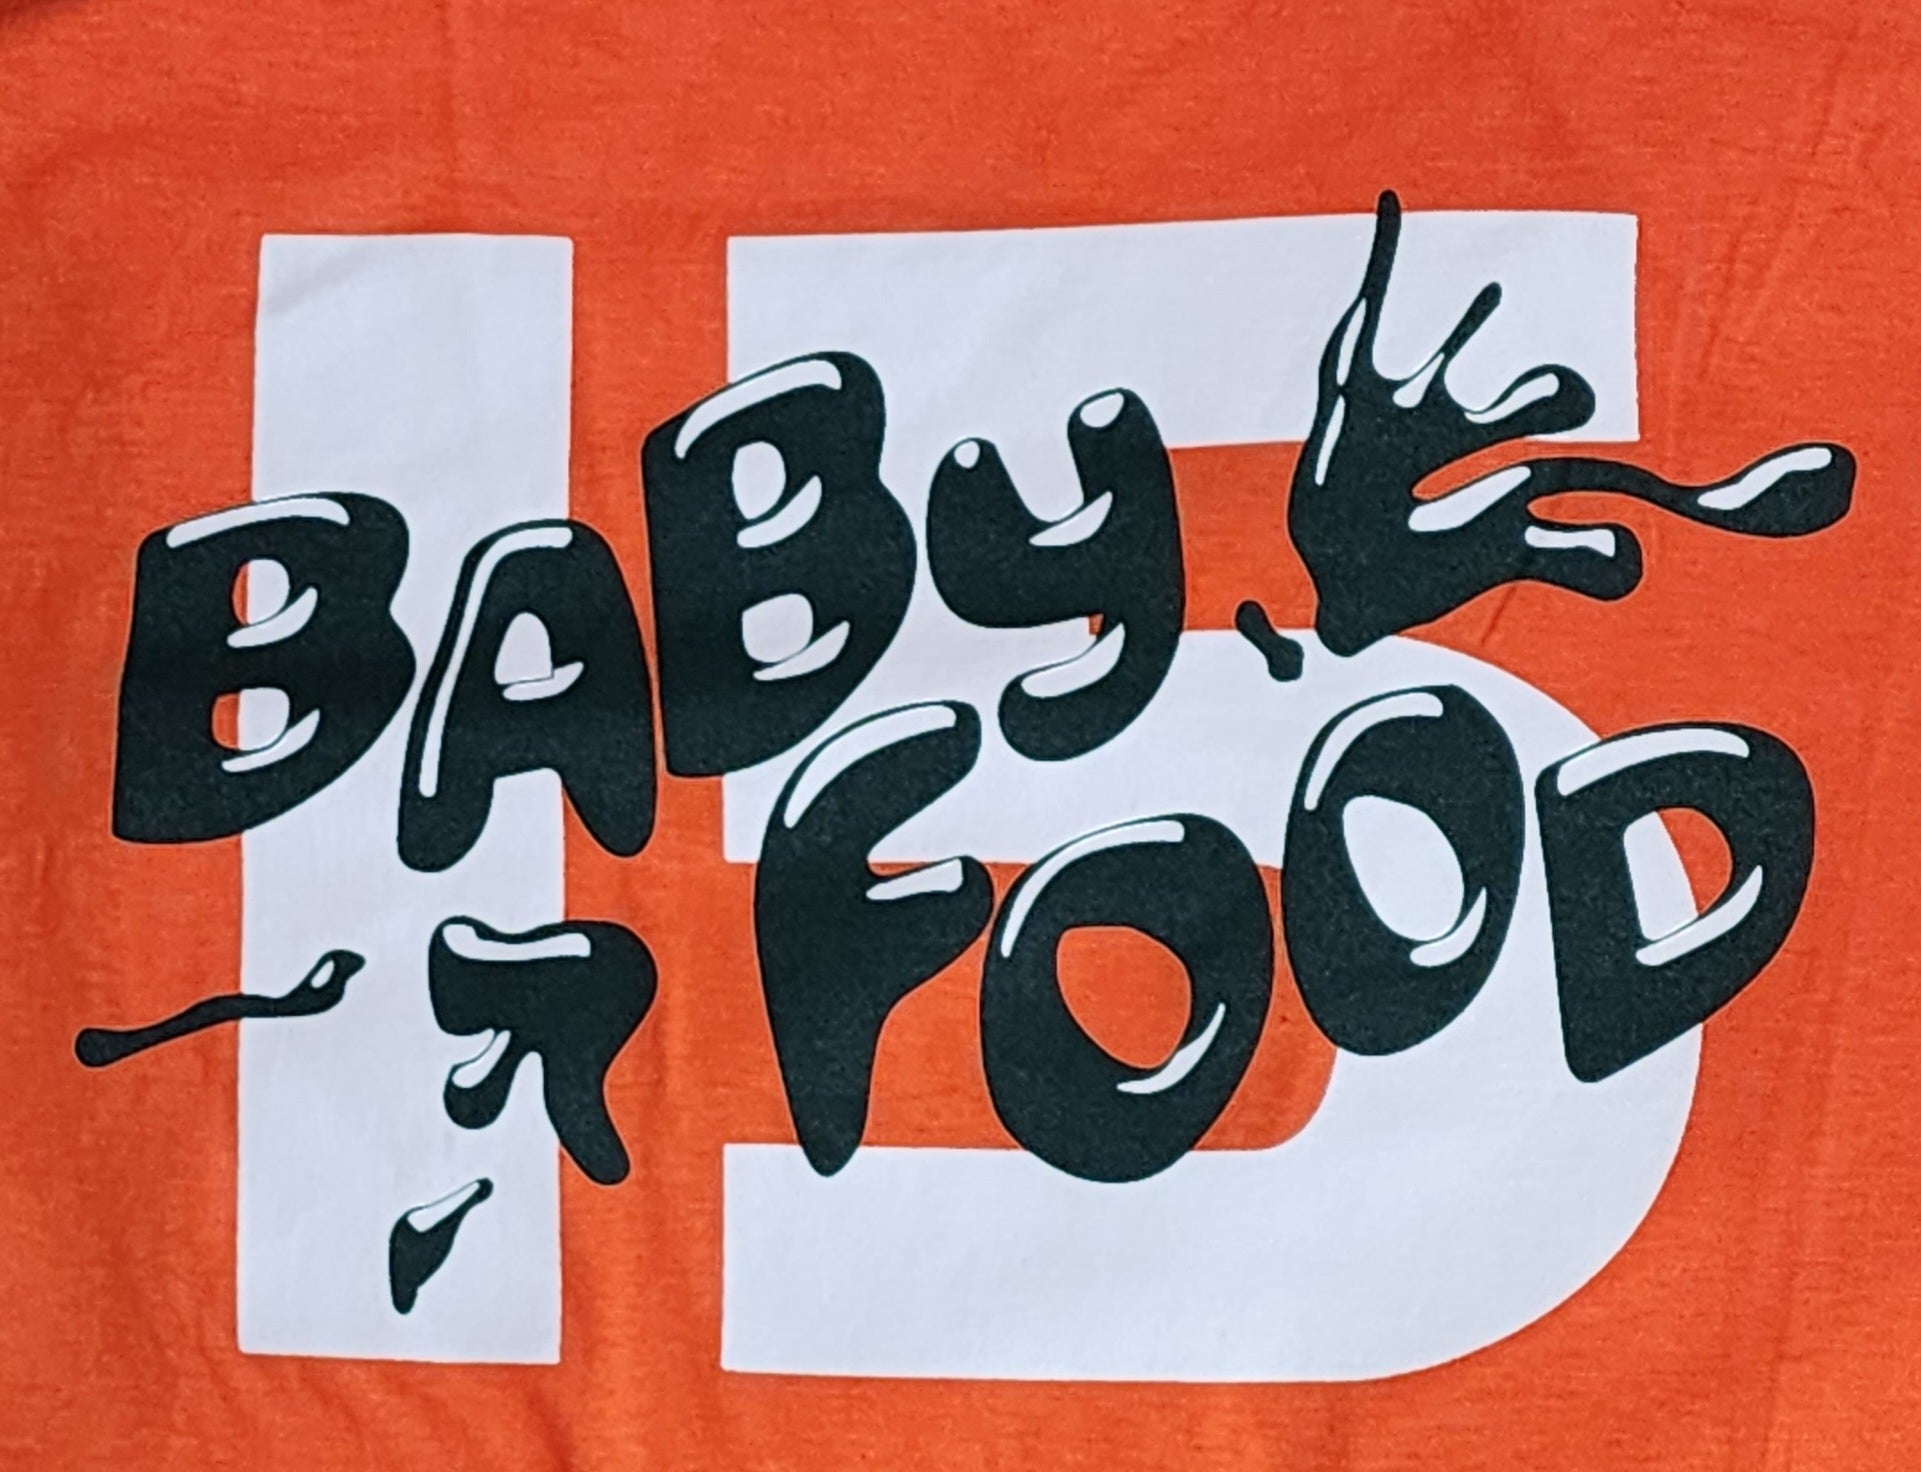 Norchad Omier 'Baby Food' Player T-Shirt - Orange